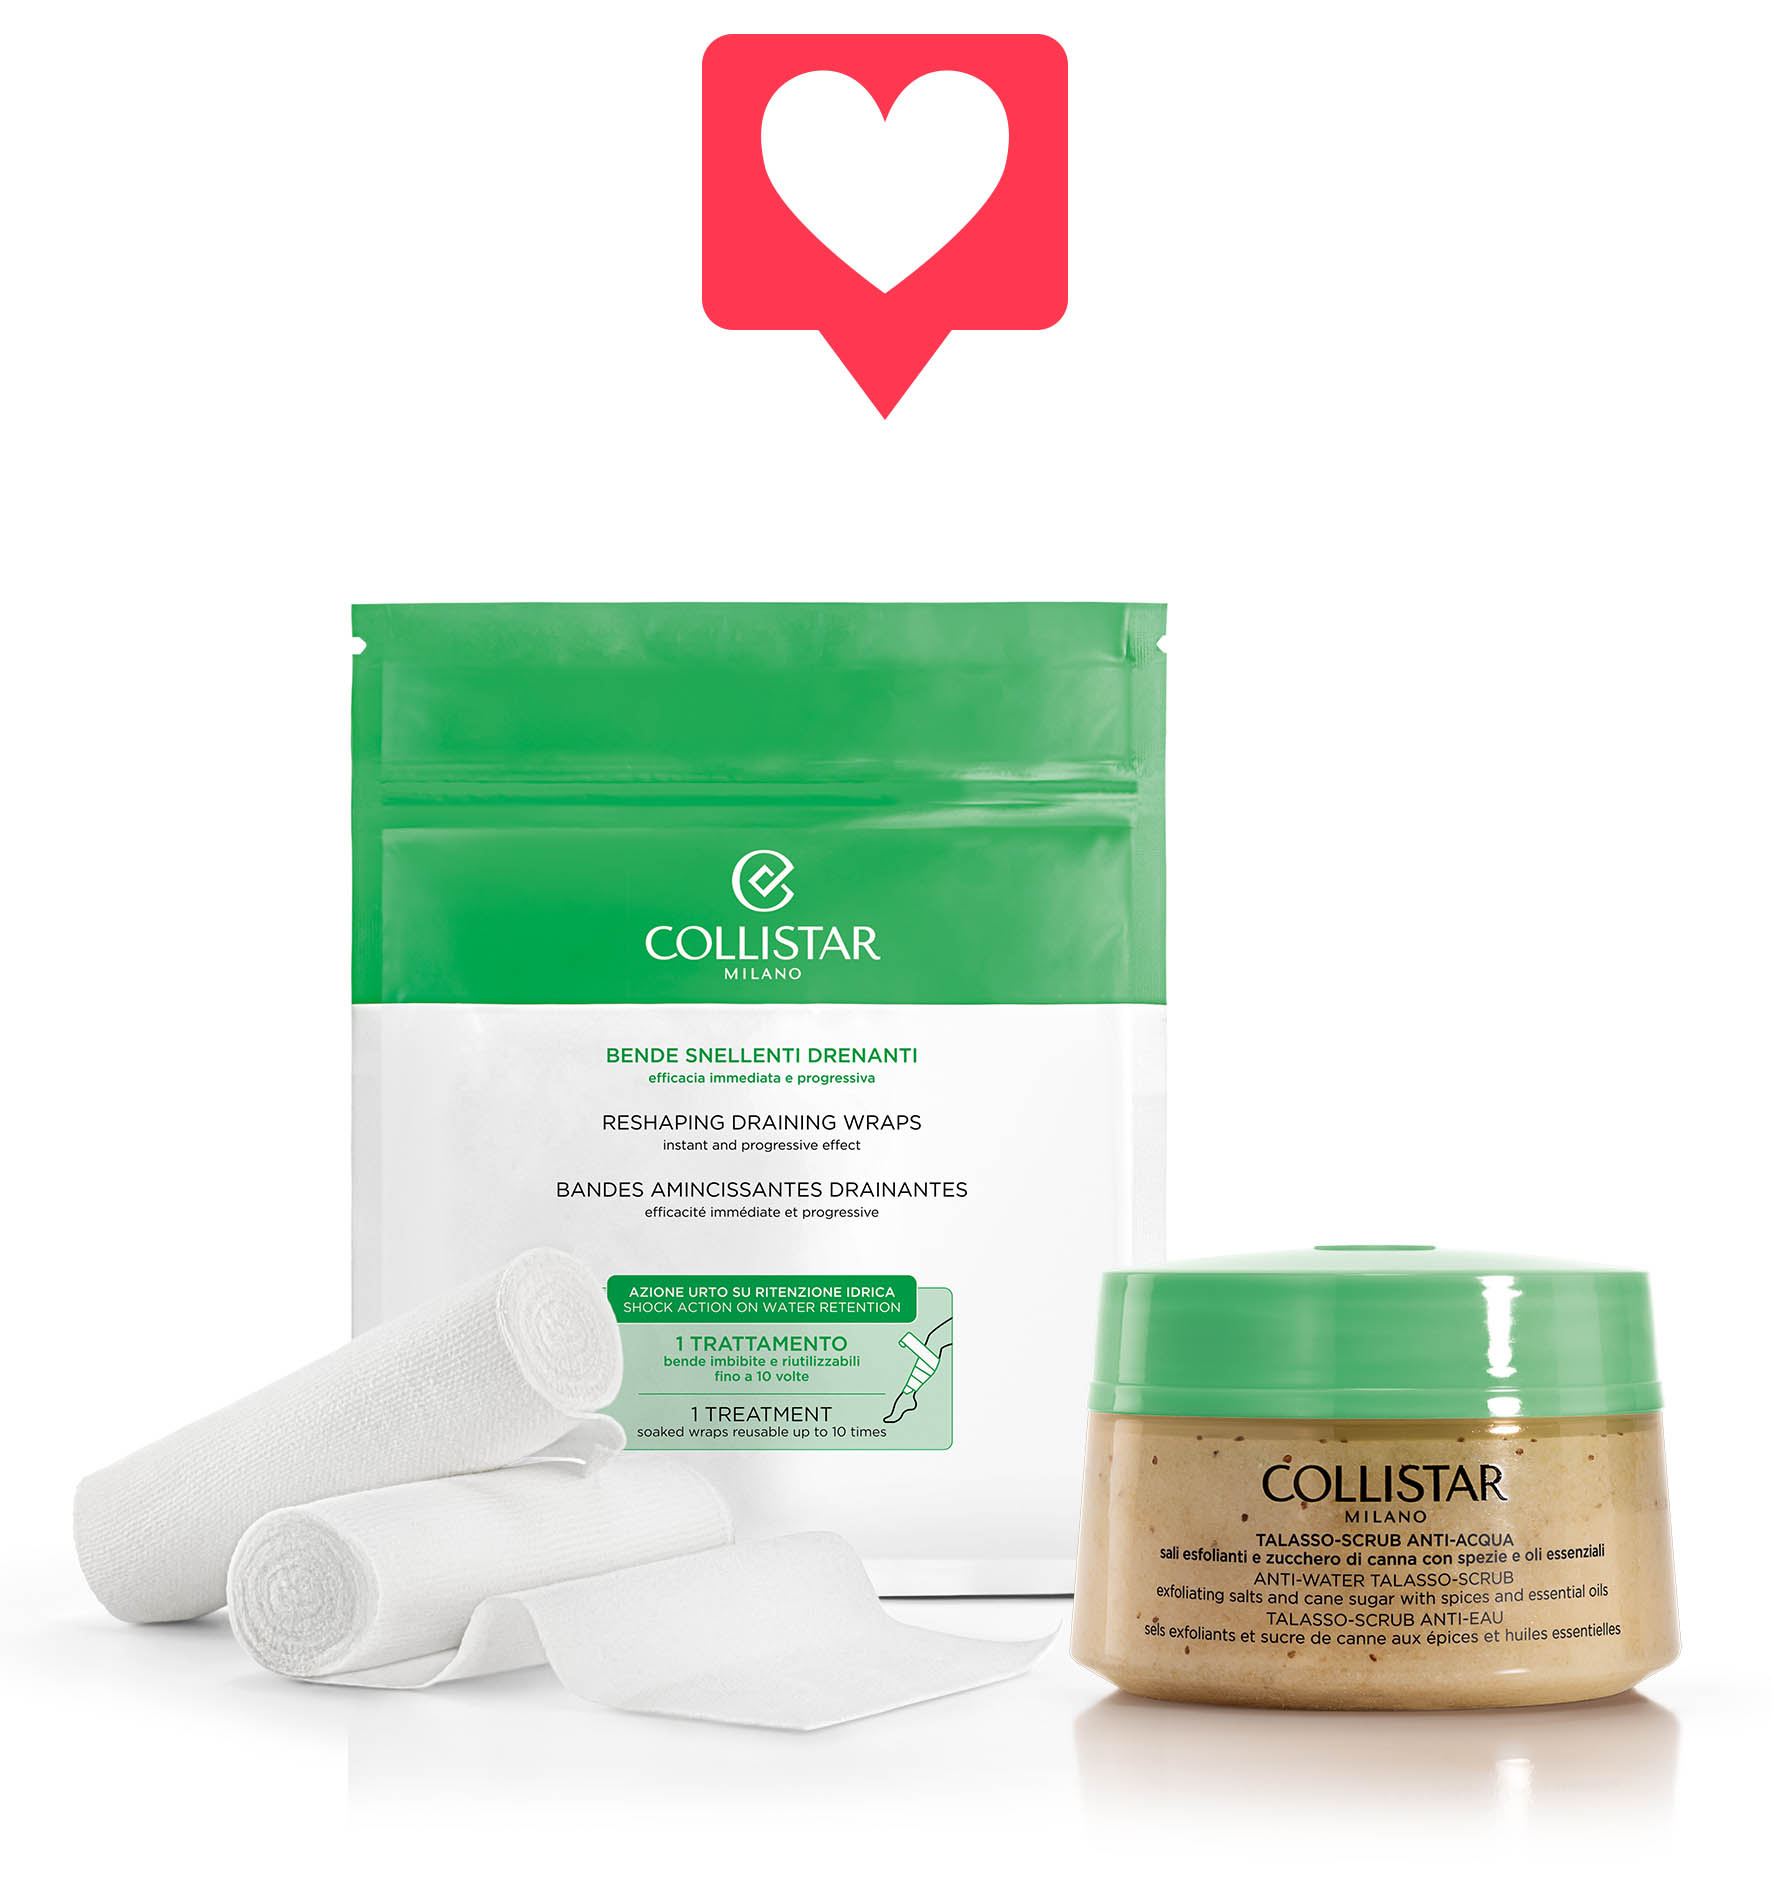 RESHAPING DRAINING WRAPS + ANTI-WATER TALASSO-SCRUB 300g - Self-Tanners | Collistar - Shop Online Ufficiale